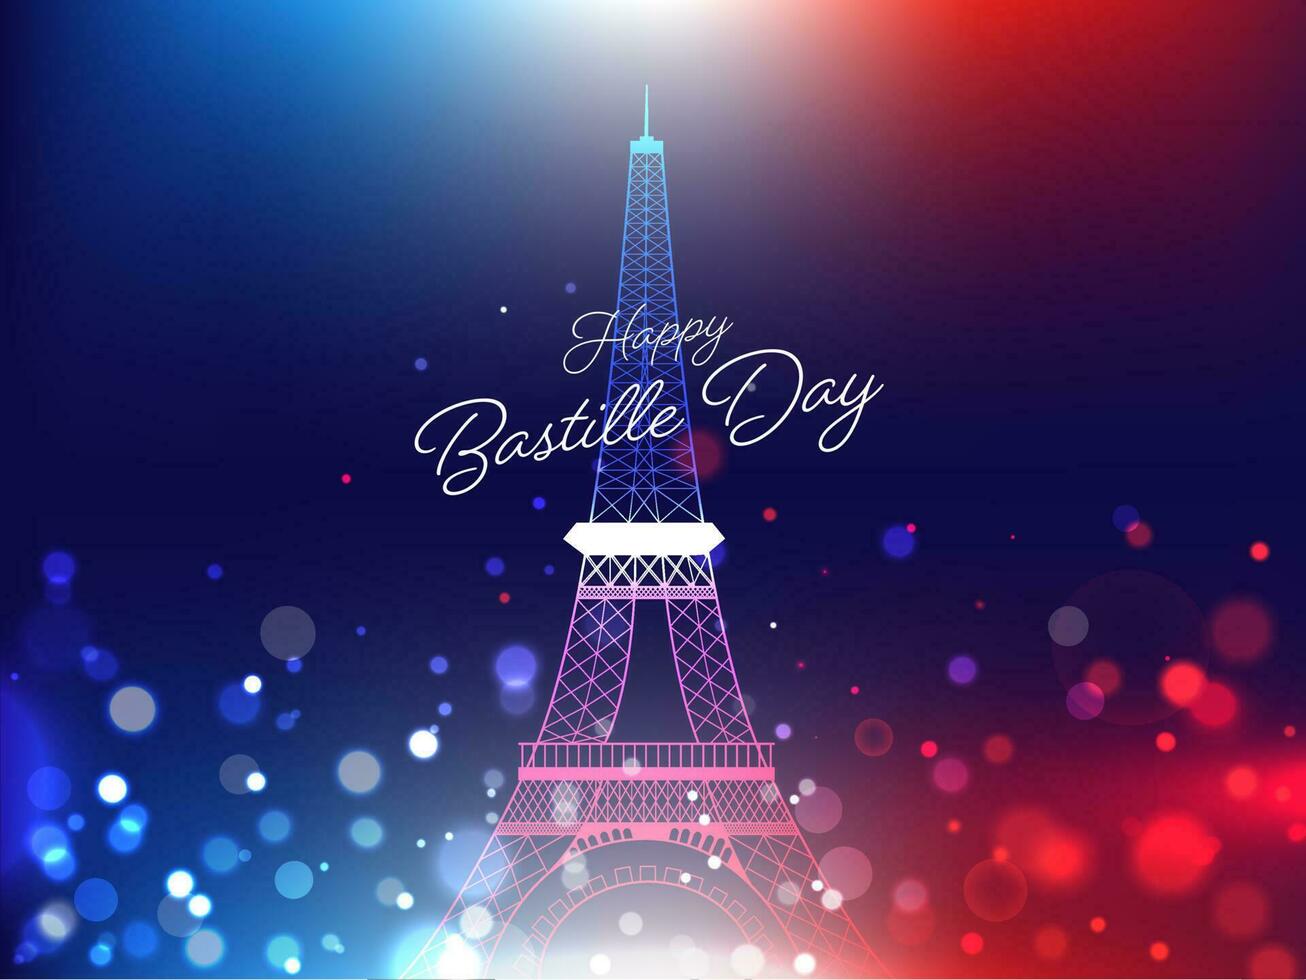 Happy Bastille Day Celebration Concept with Eiffel Tower Monument on Abstract Bokeh Lights Effect Background. vector